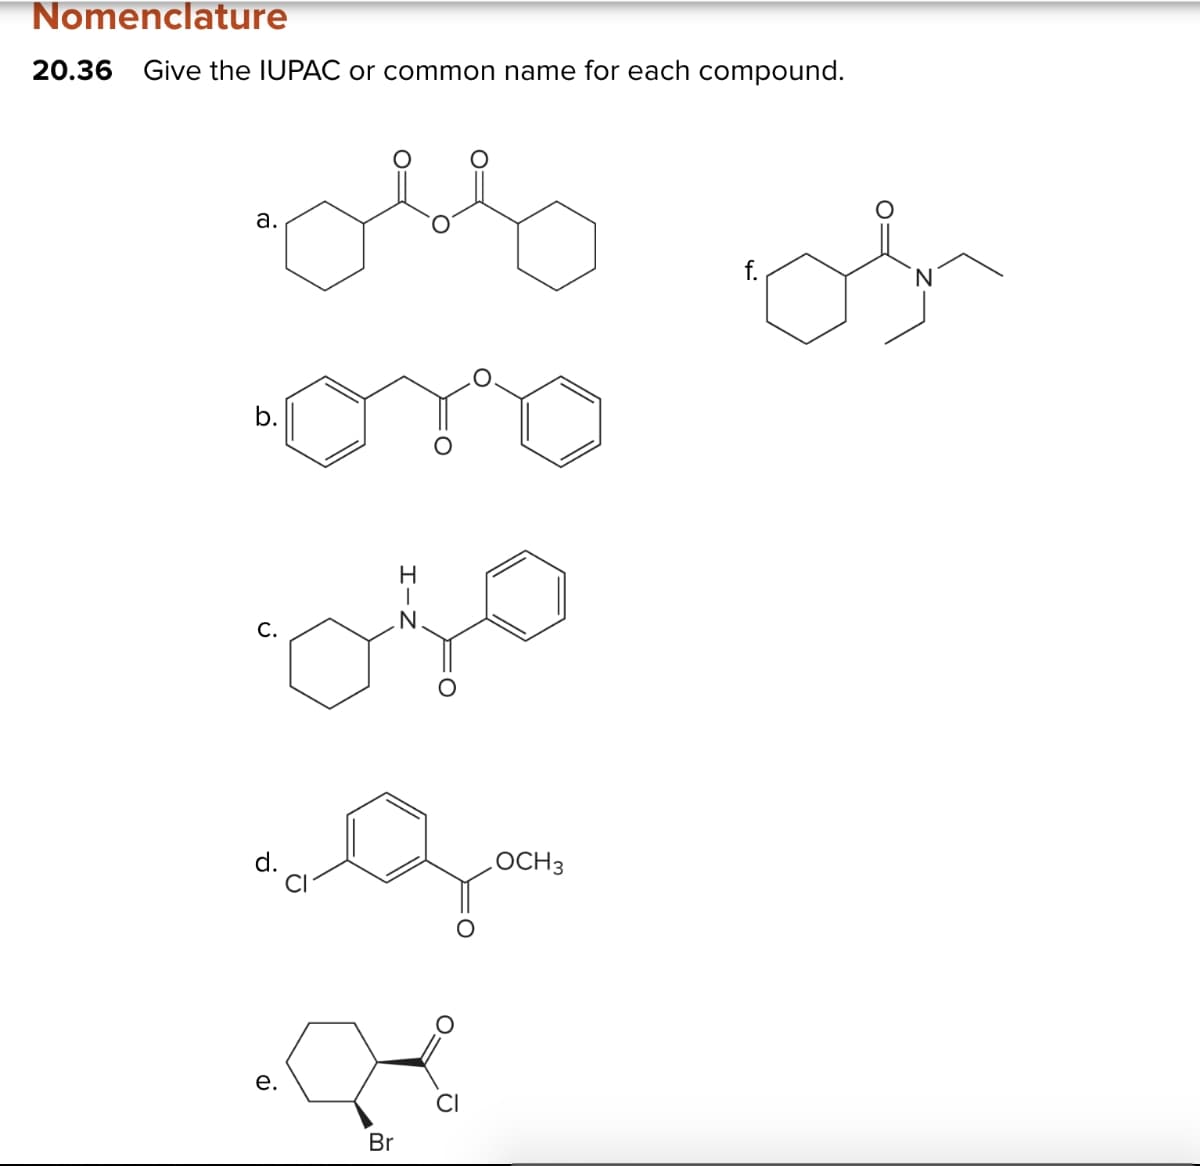 Nomenclature
20.36 Give the IUPAC or common name for each compound.
معلم
a.
b.
C.
H
.N
e.
བྱིན ཏེ།
LOCH 3
Br
CI